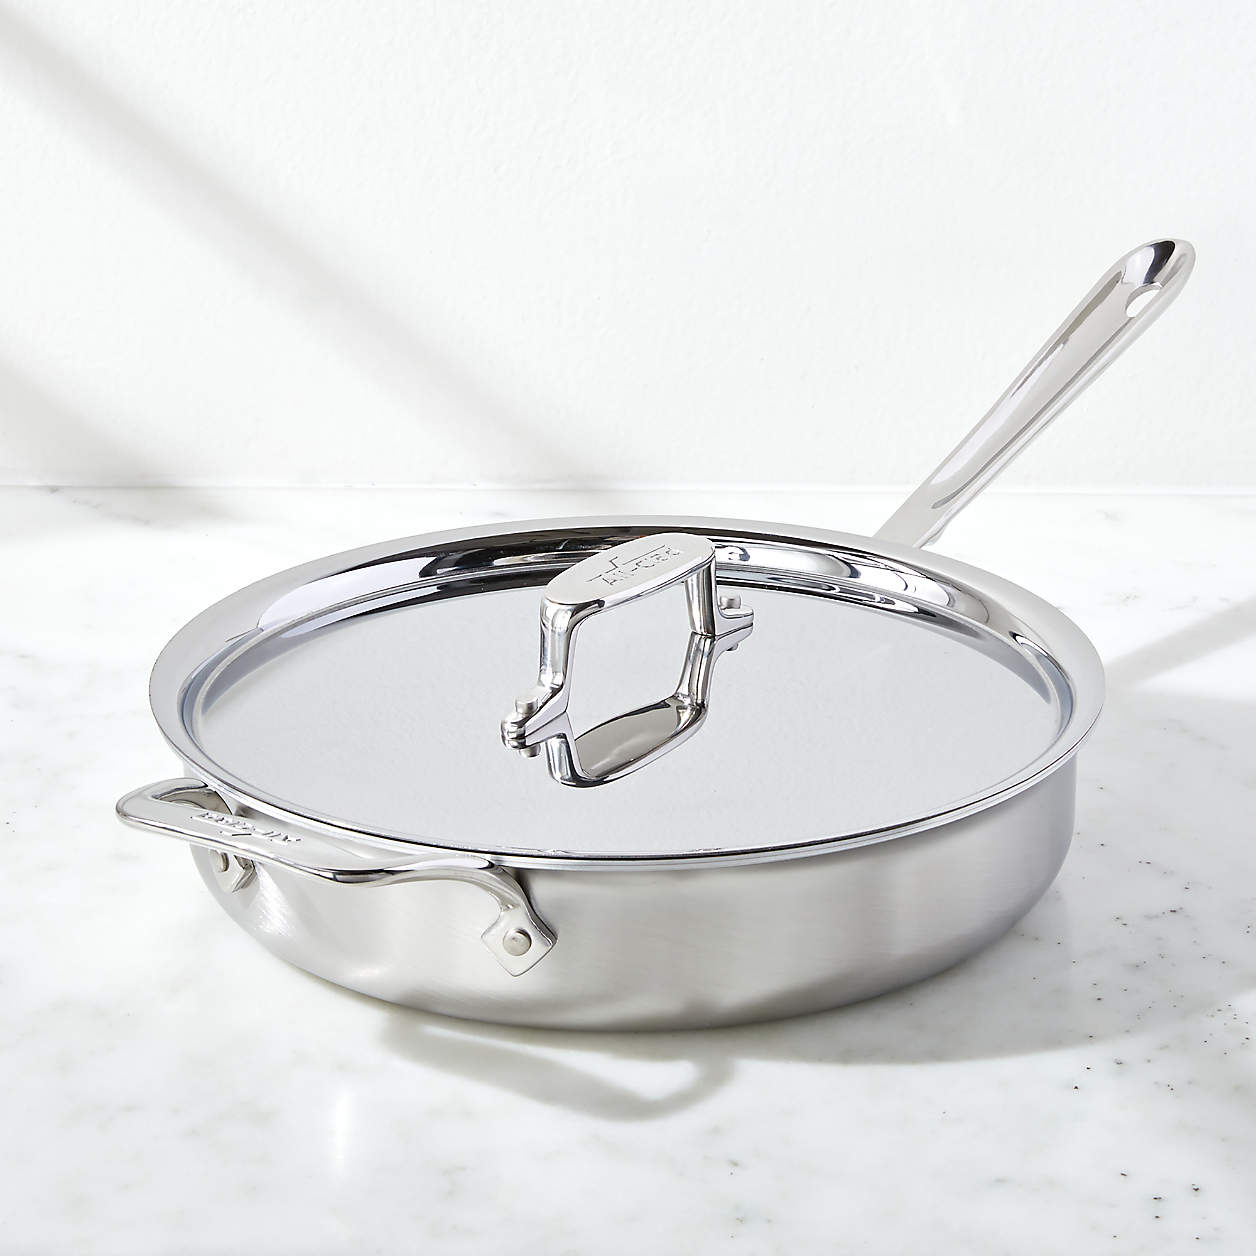 All-Clad d5 Brushed Stainless Steel 3-Quart Sauté Pan with Lid All Clad Stainless Steel 3 Quart Saucepan